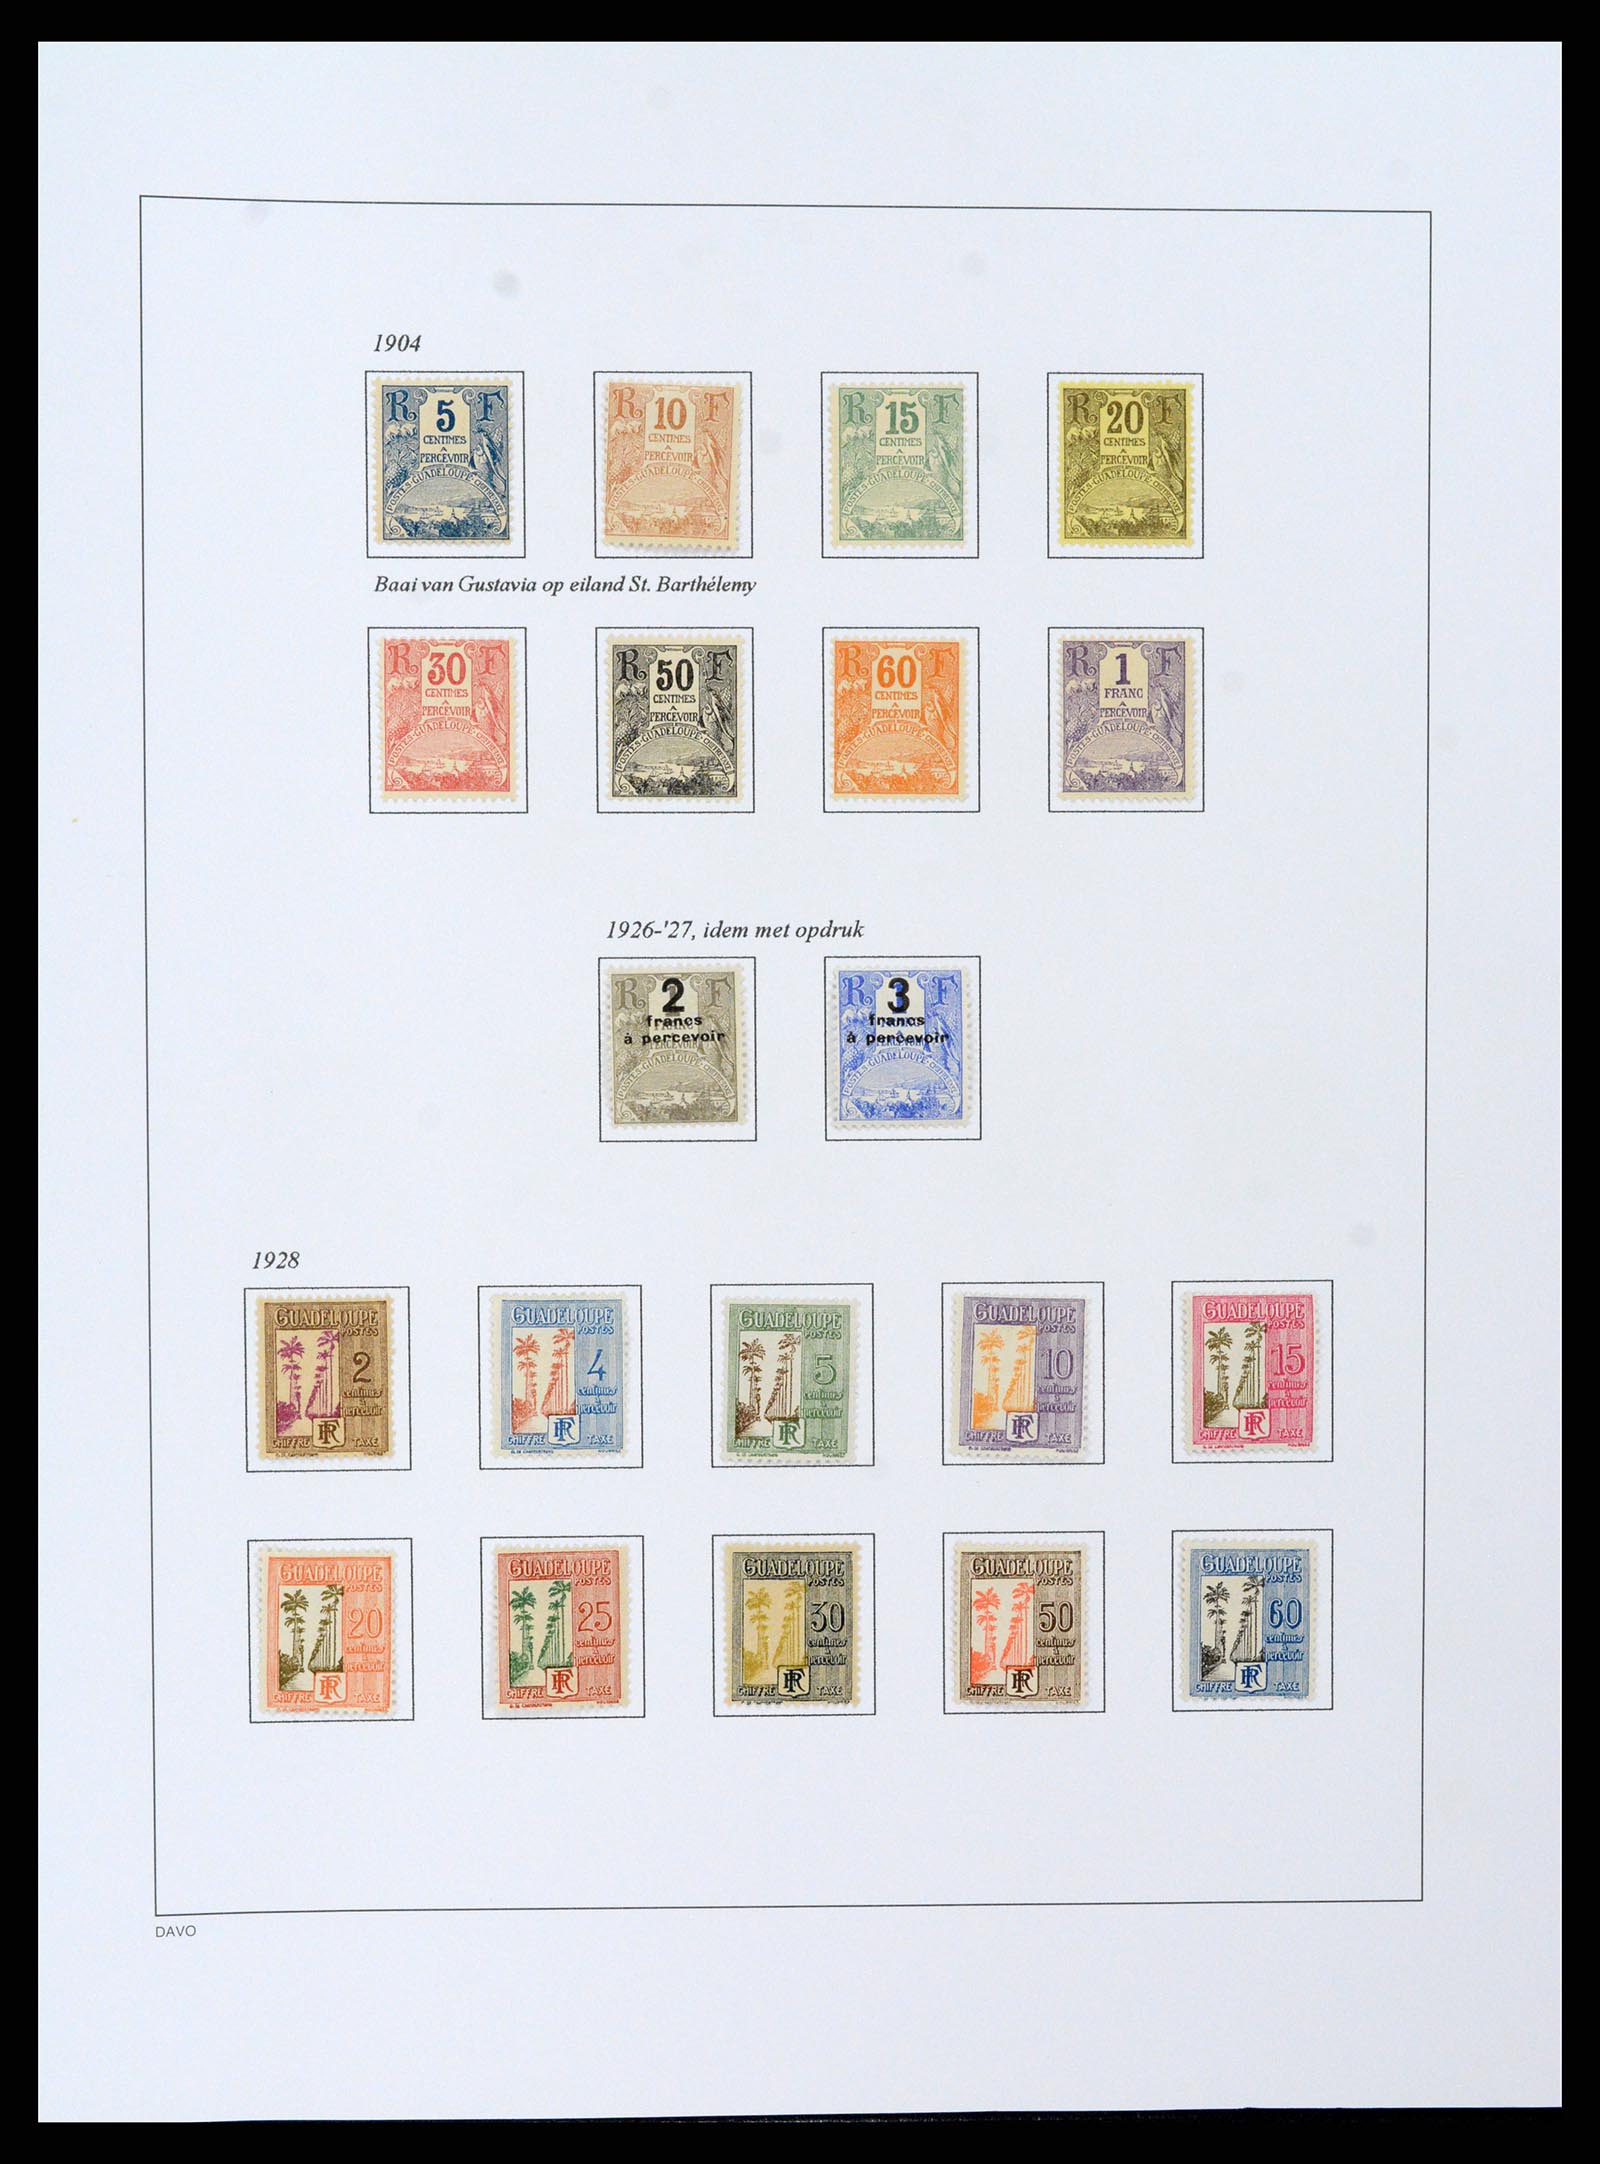 37480 088 - Stamp collection 37480 Guadeloupe supercollection 1823-1947.